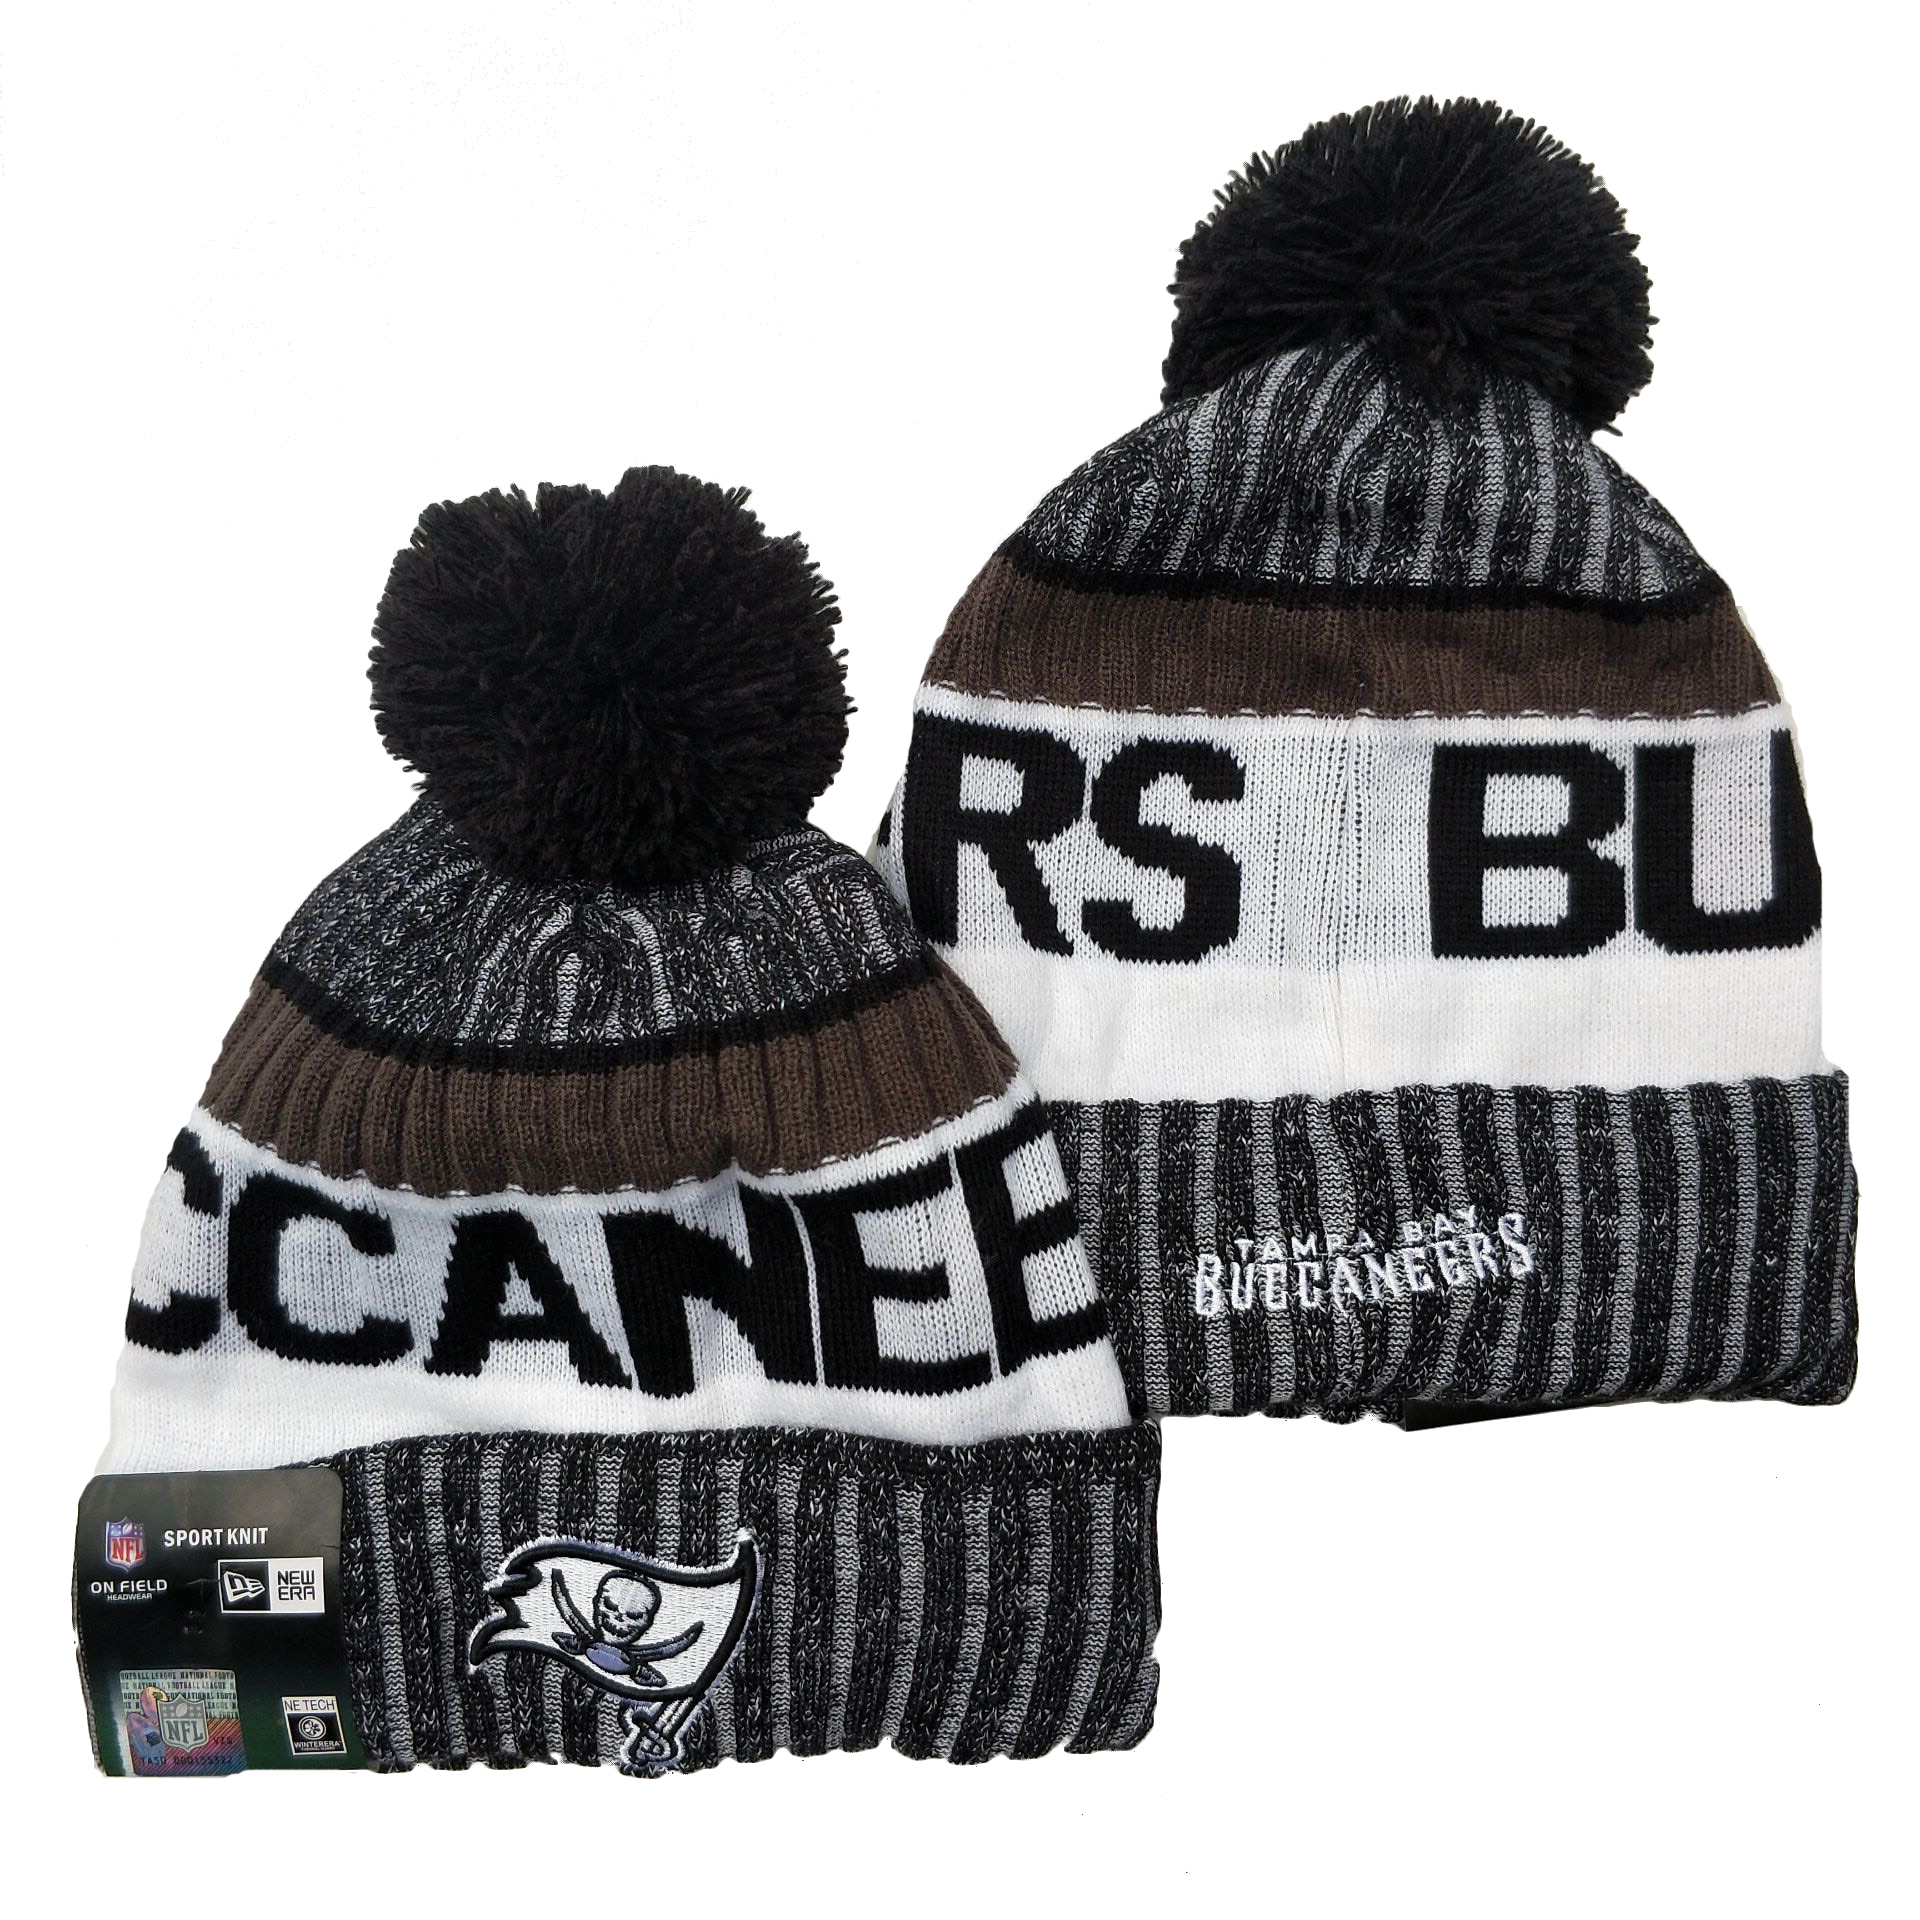 Tampa Bay Buccaneers 2021 Knit Hats 005